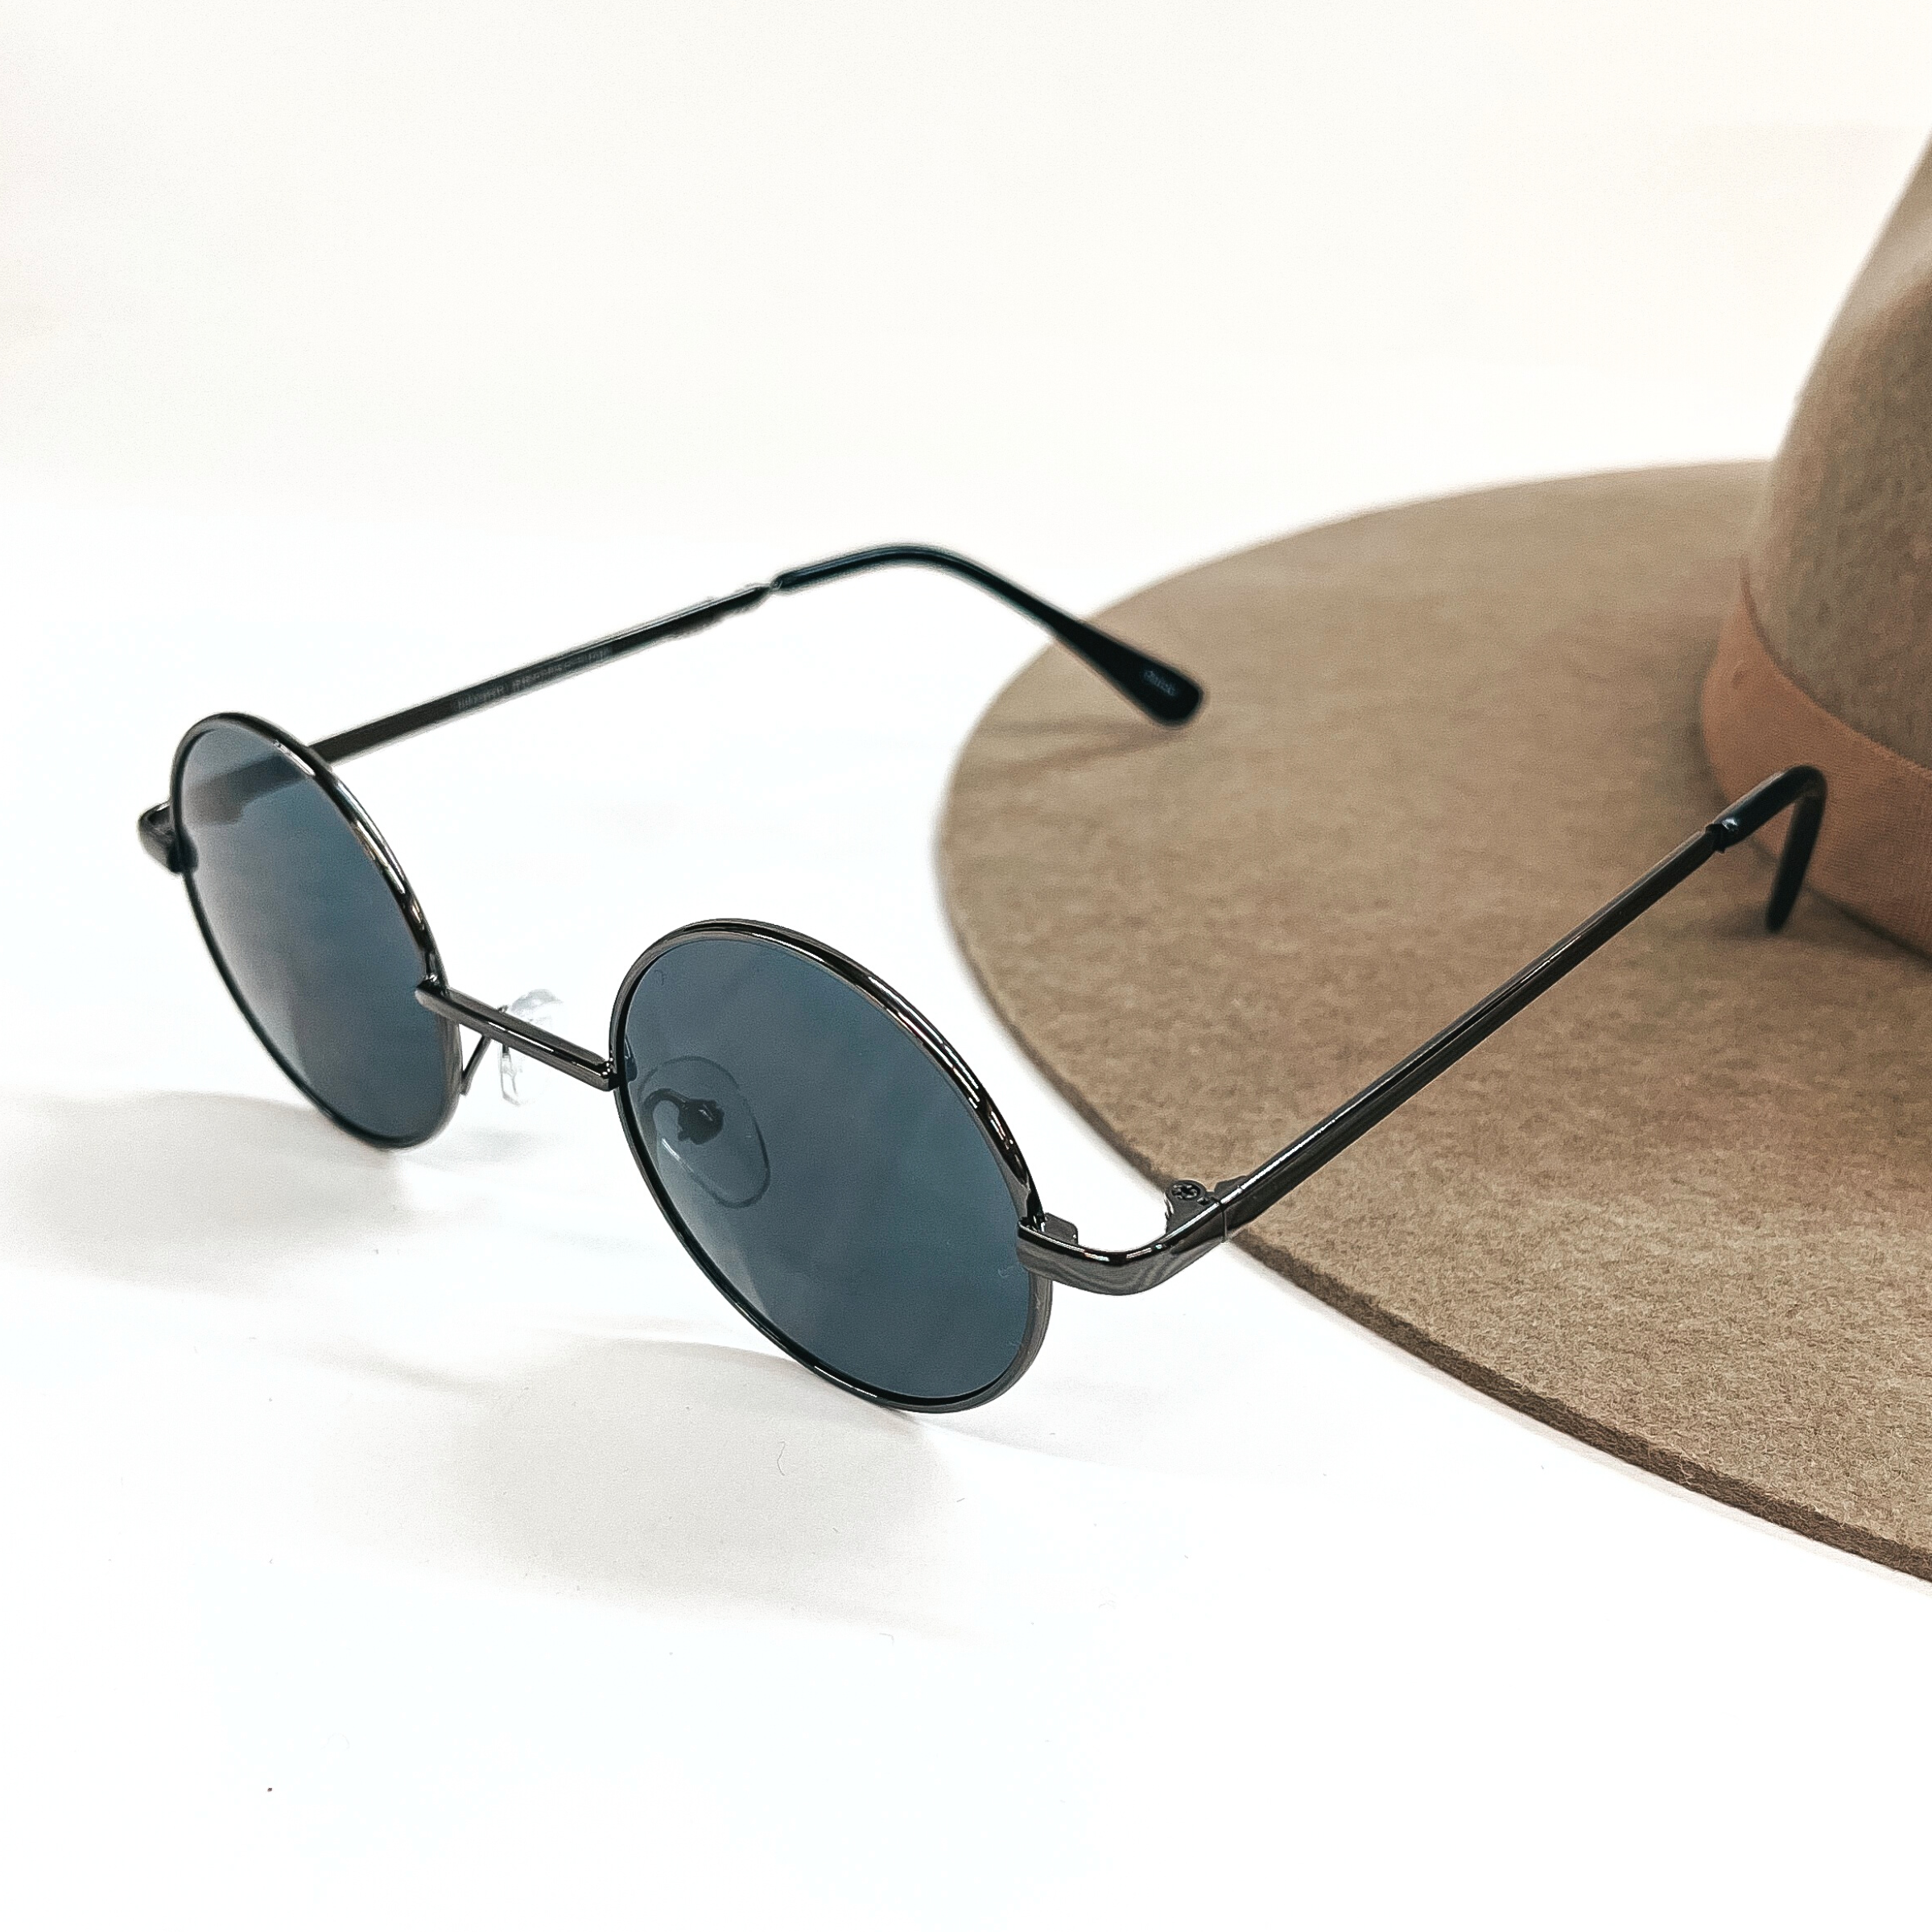 These are small circle sunglasses with black/dark grey lenses and a  gunmetal outline/frame.  These sunglasses are taken on a a white background and on a brown  felt hat brim.